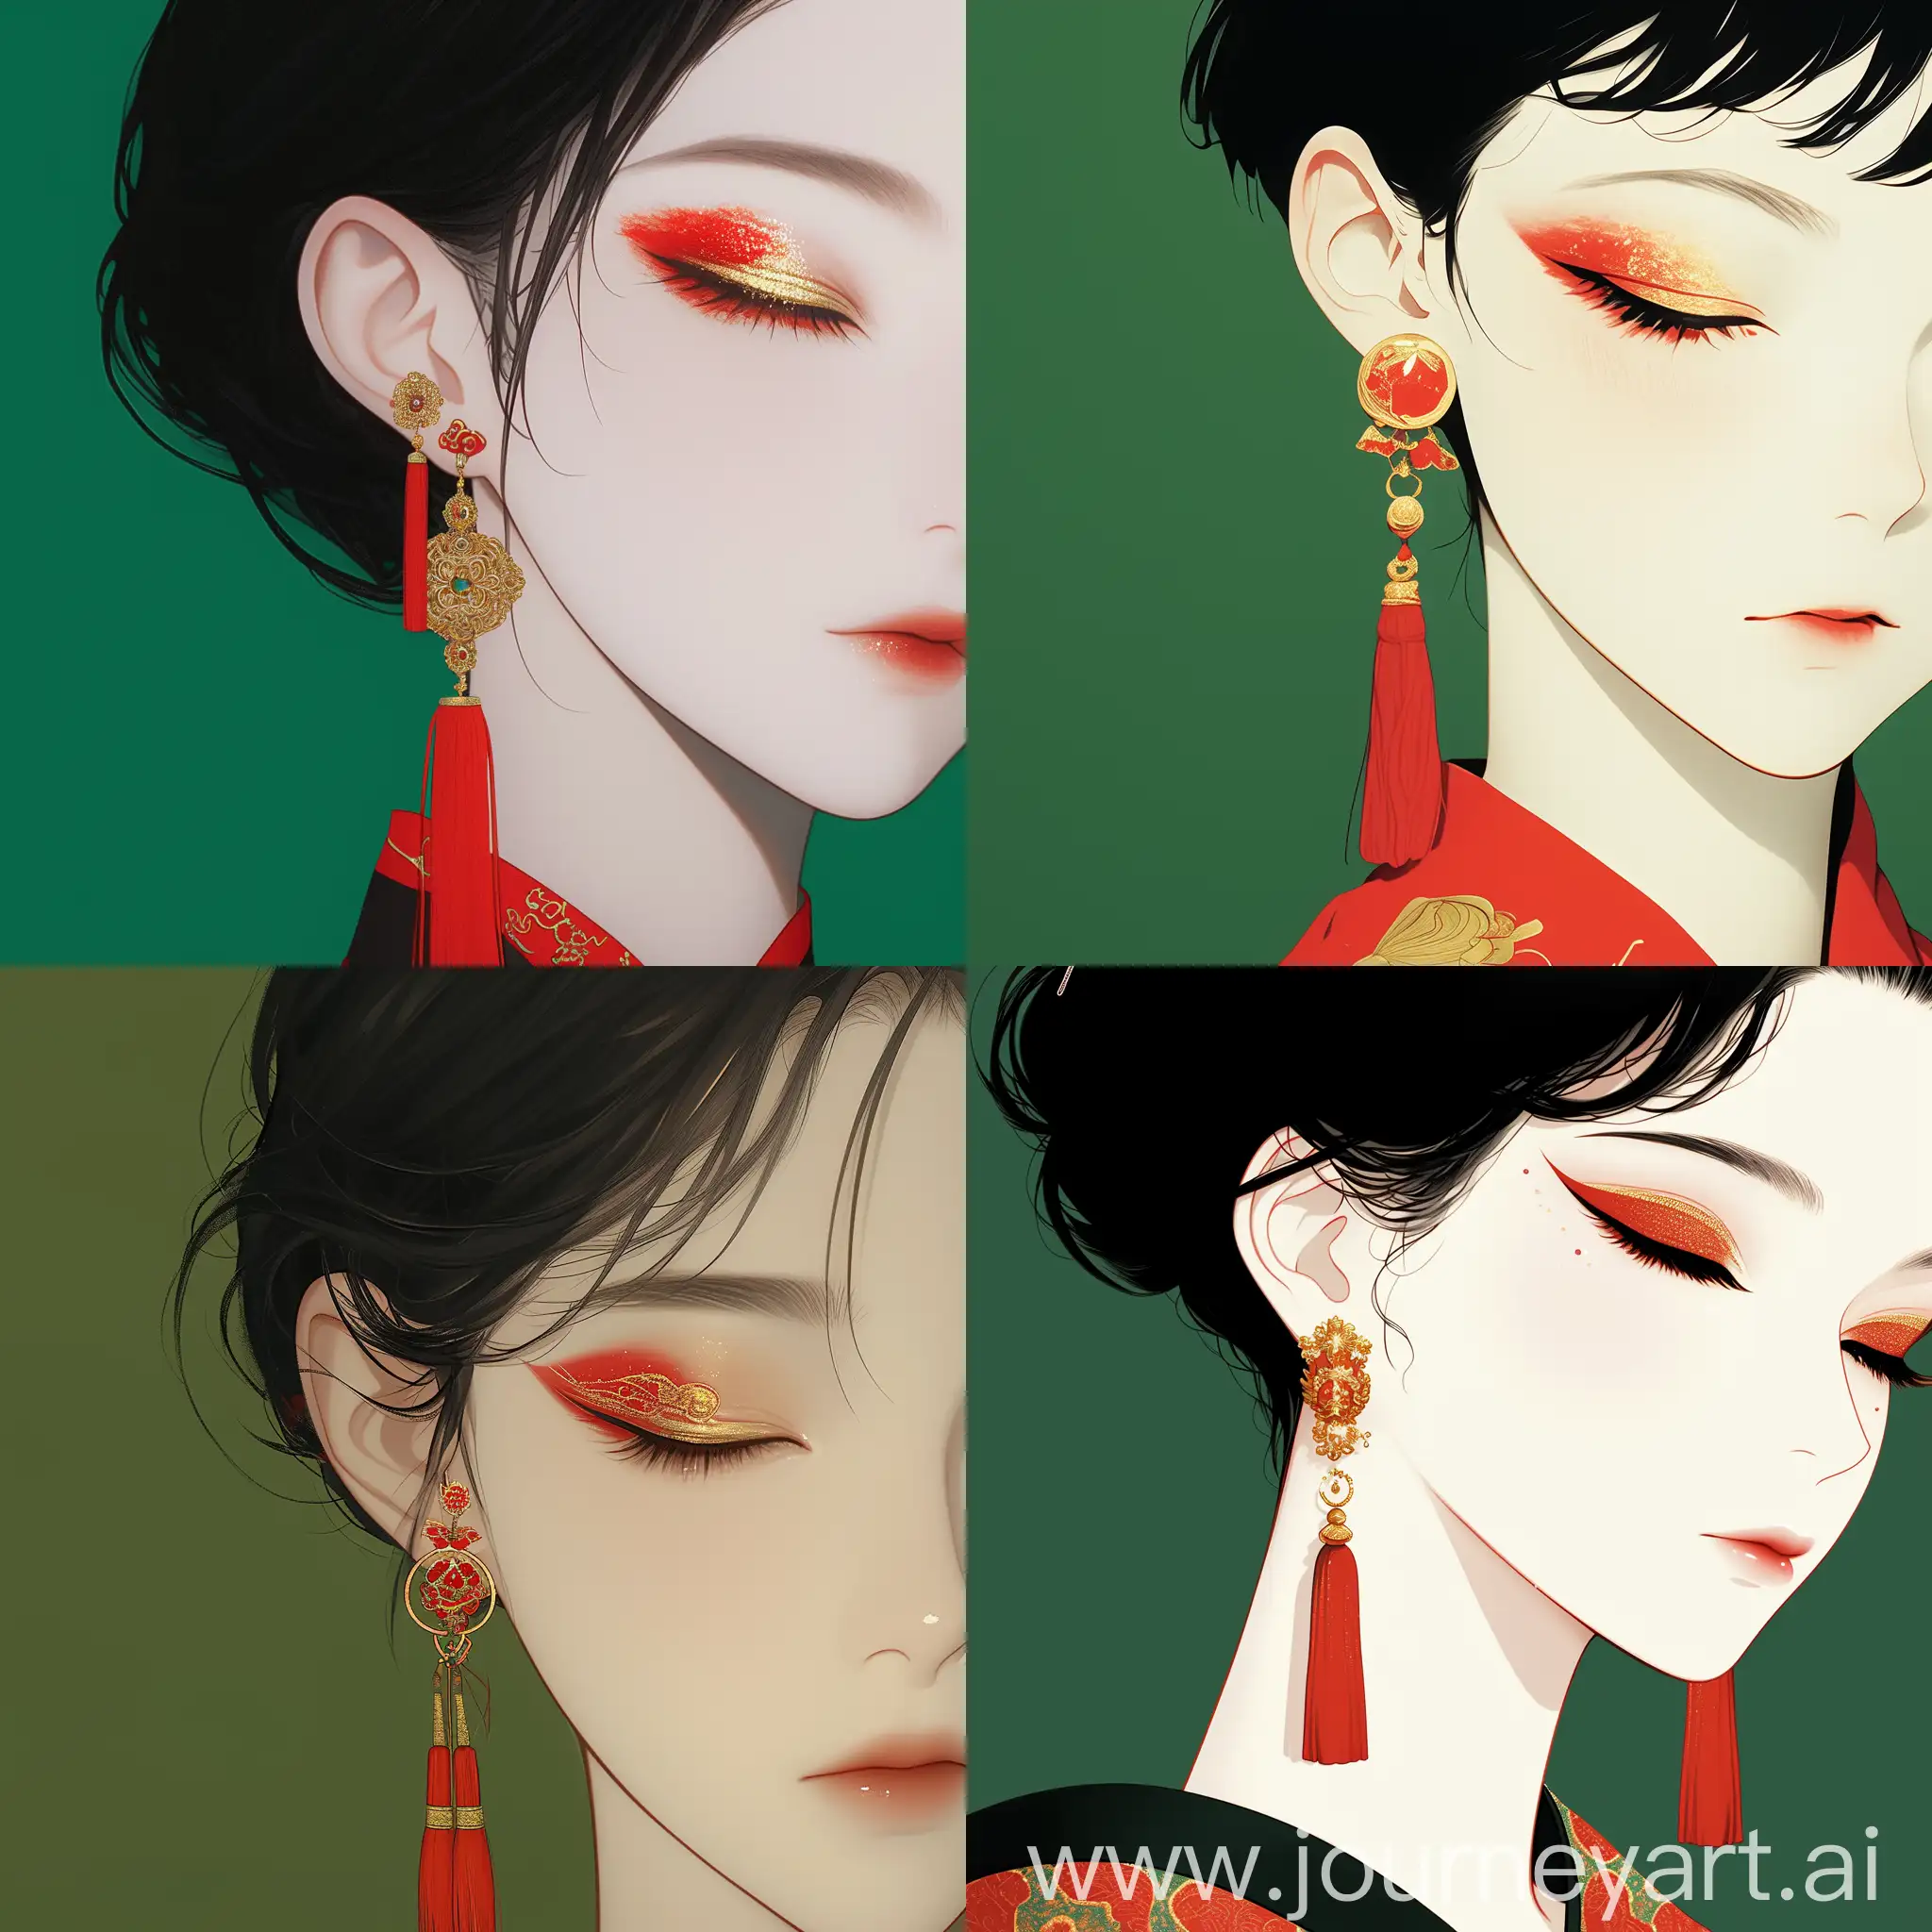 Elegant-Anime-Girl-Portrait-with-Red-and-Gold-Makeup-in-Classical-Art-Style